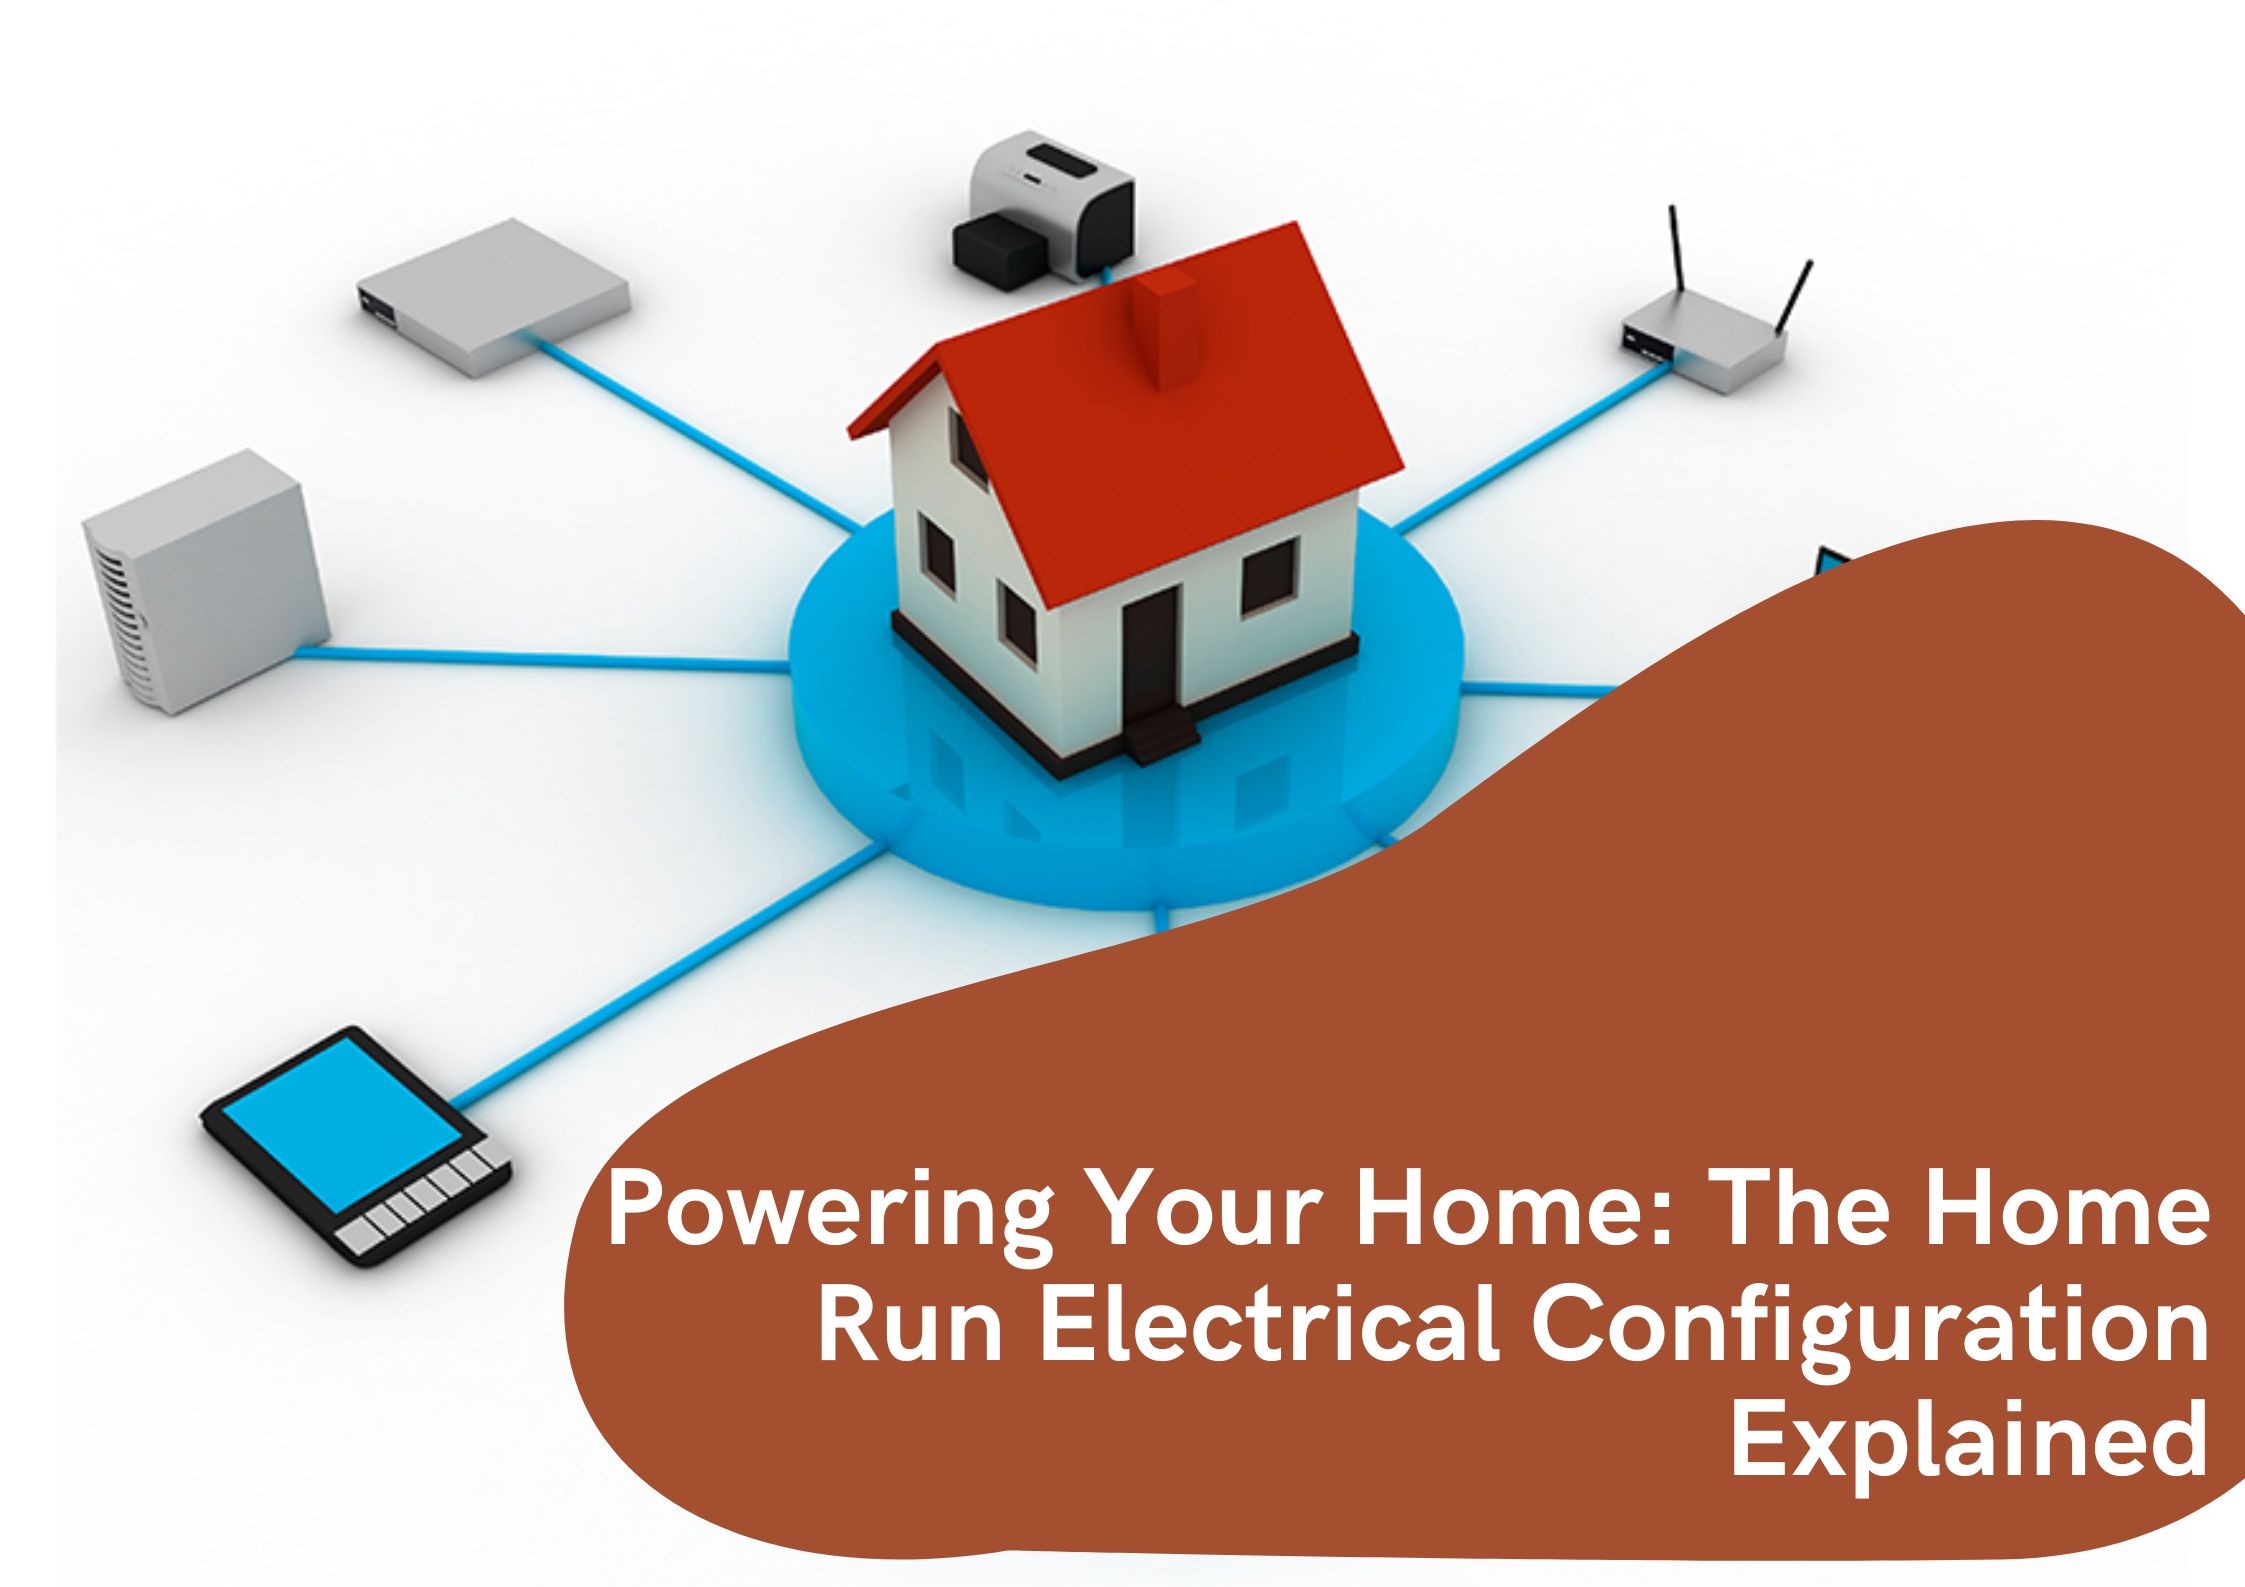 The Home Run Electrical Configuration